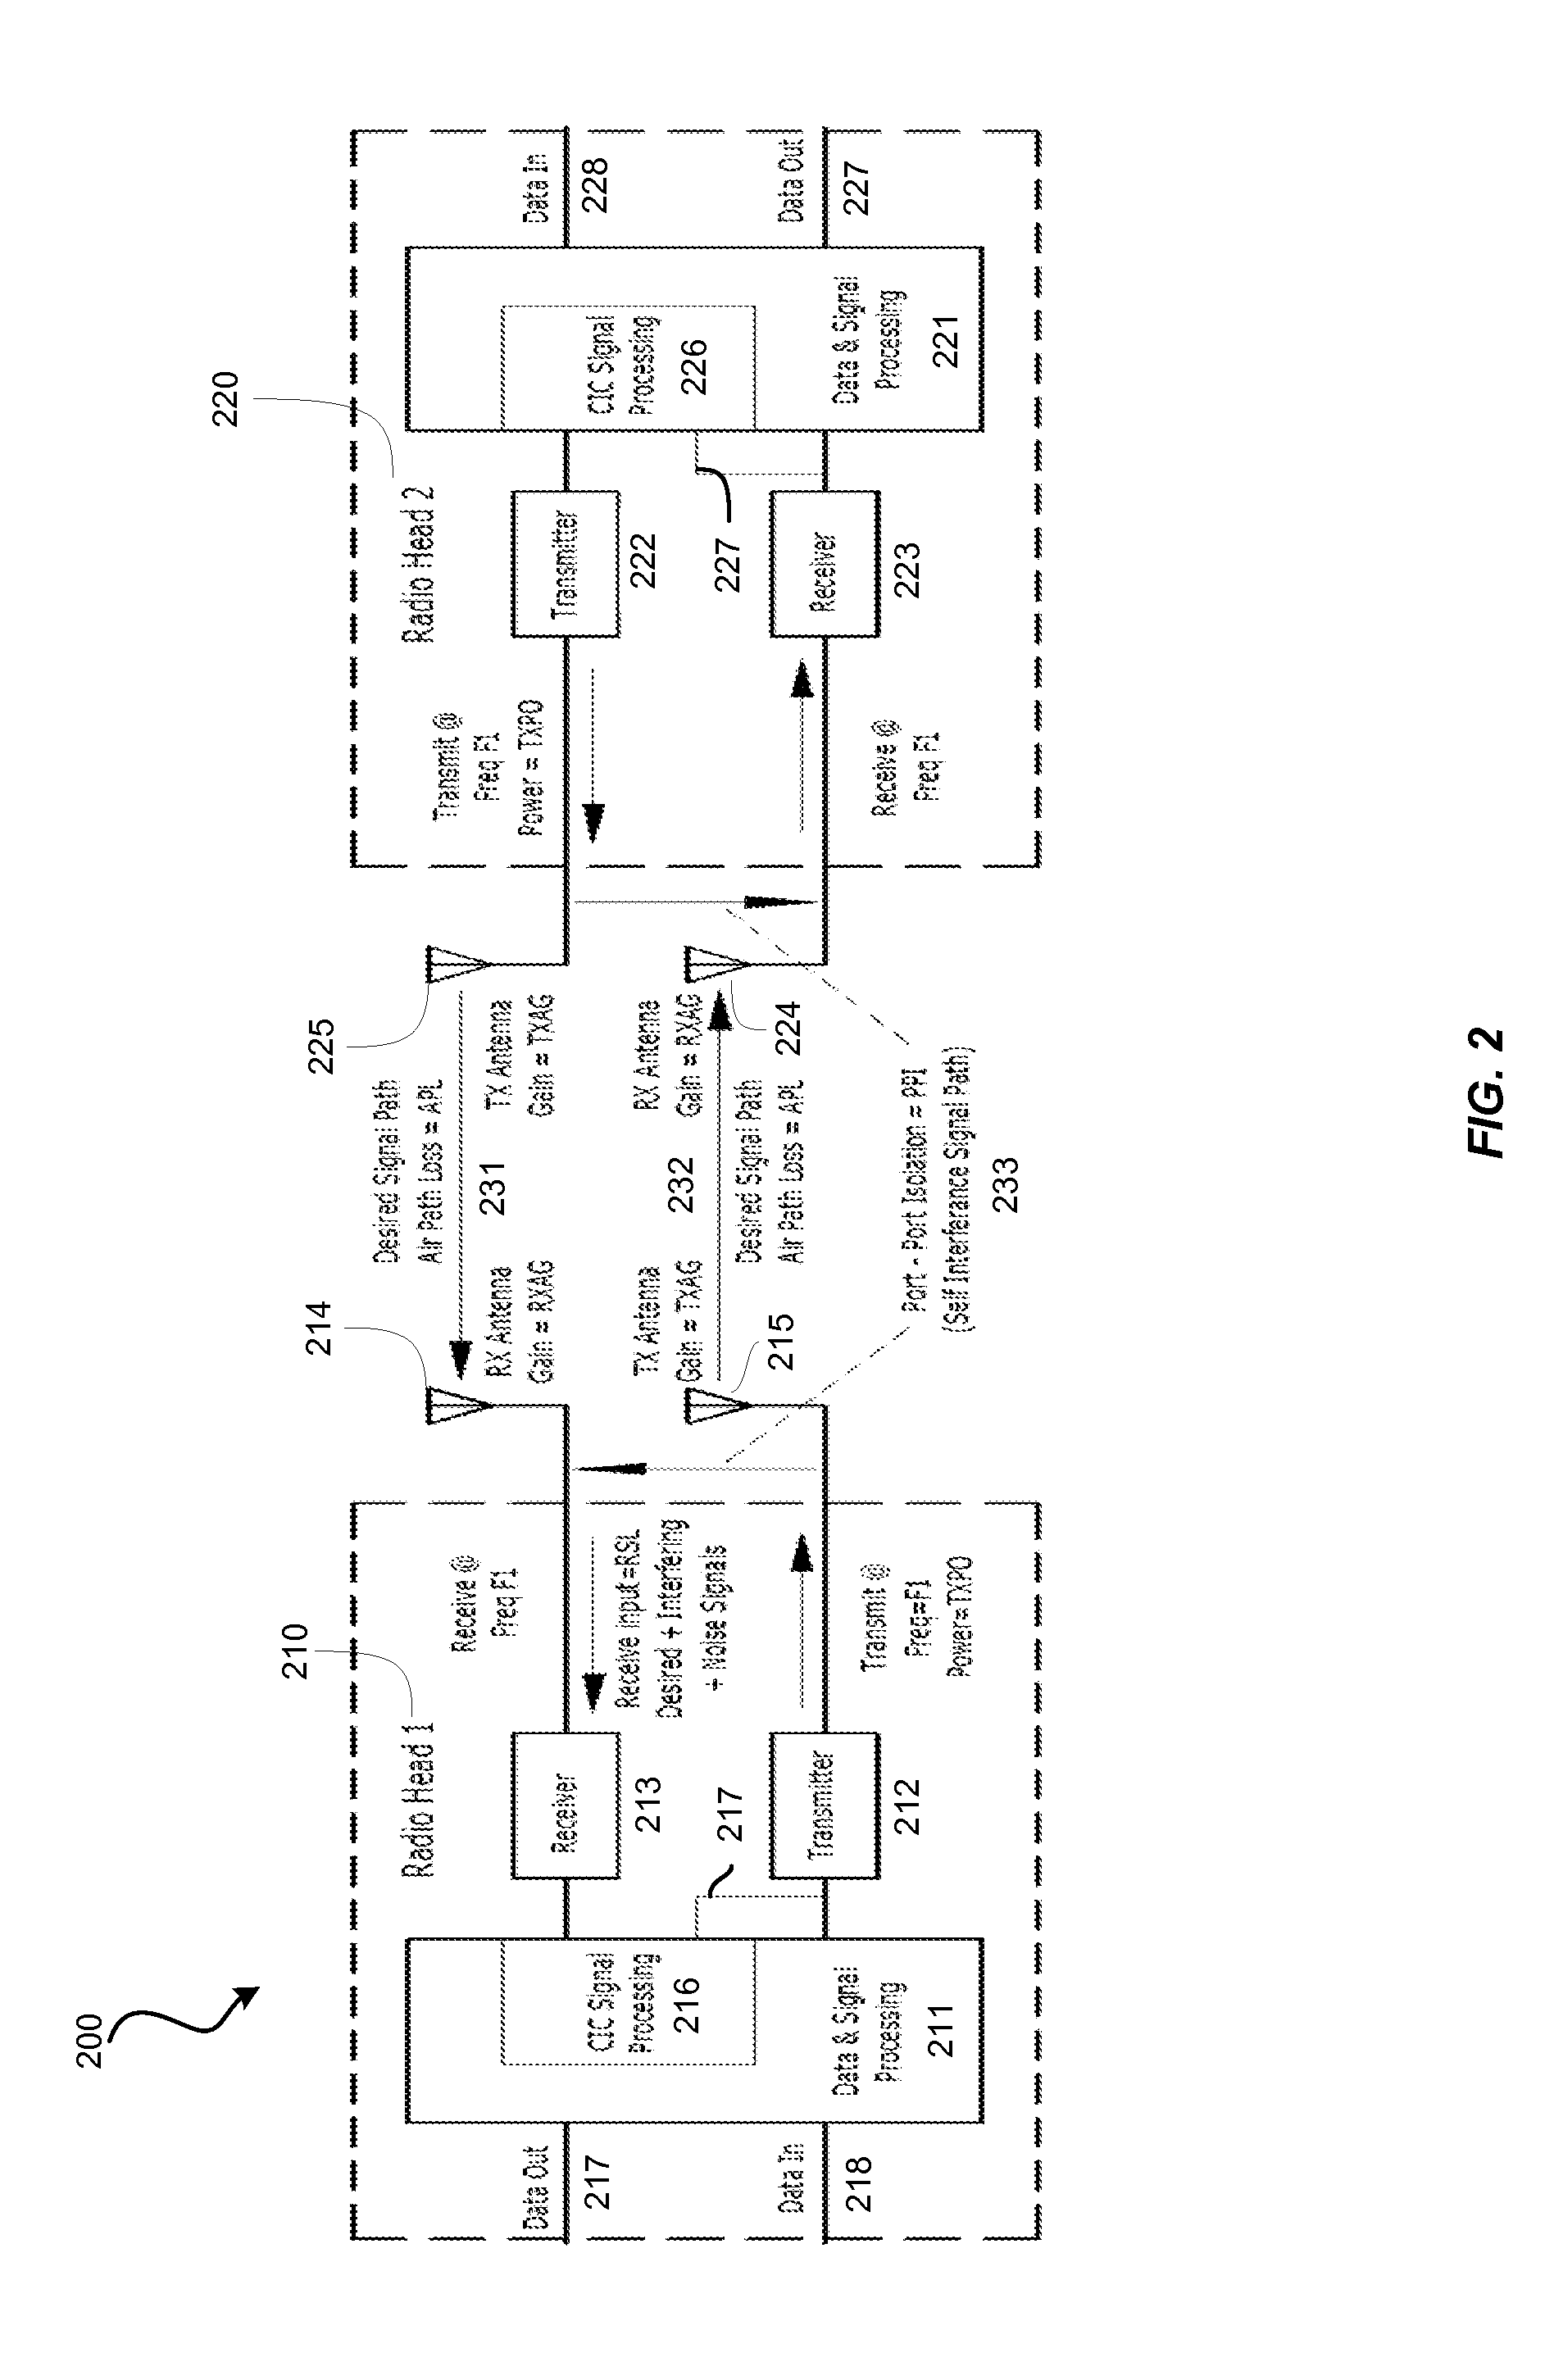 Simultaneous bidirectional transmission for radio systems